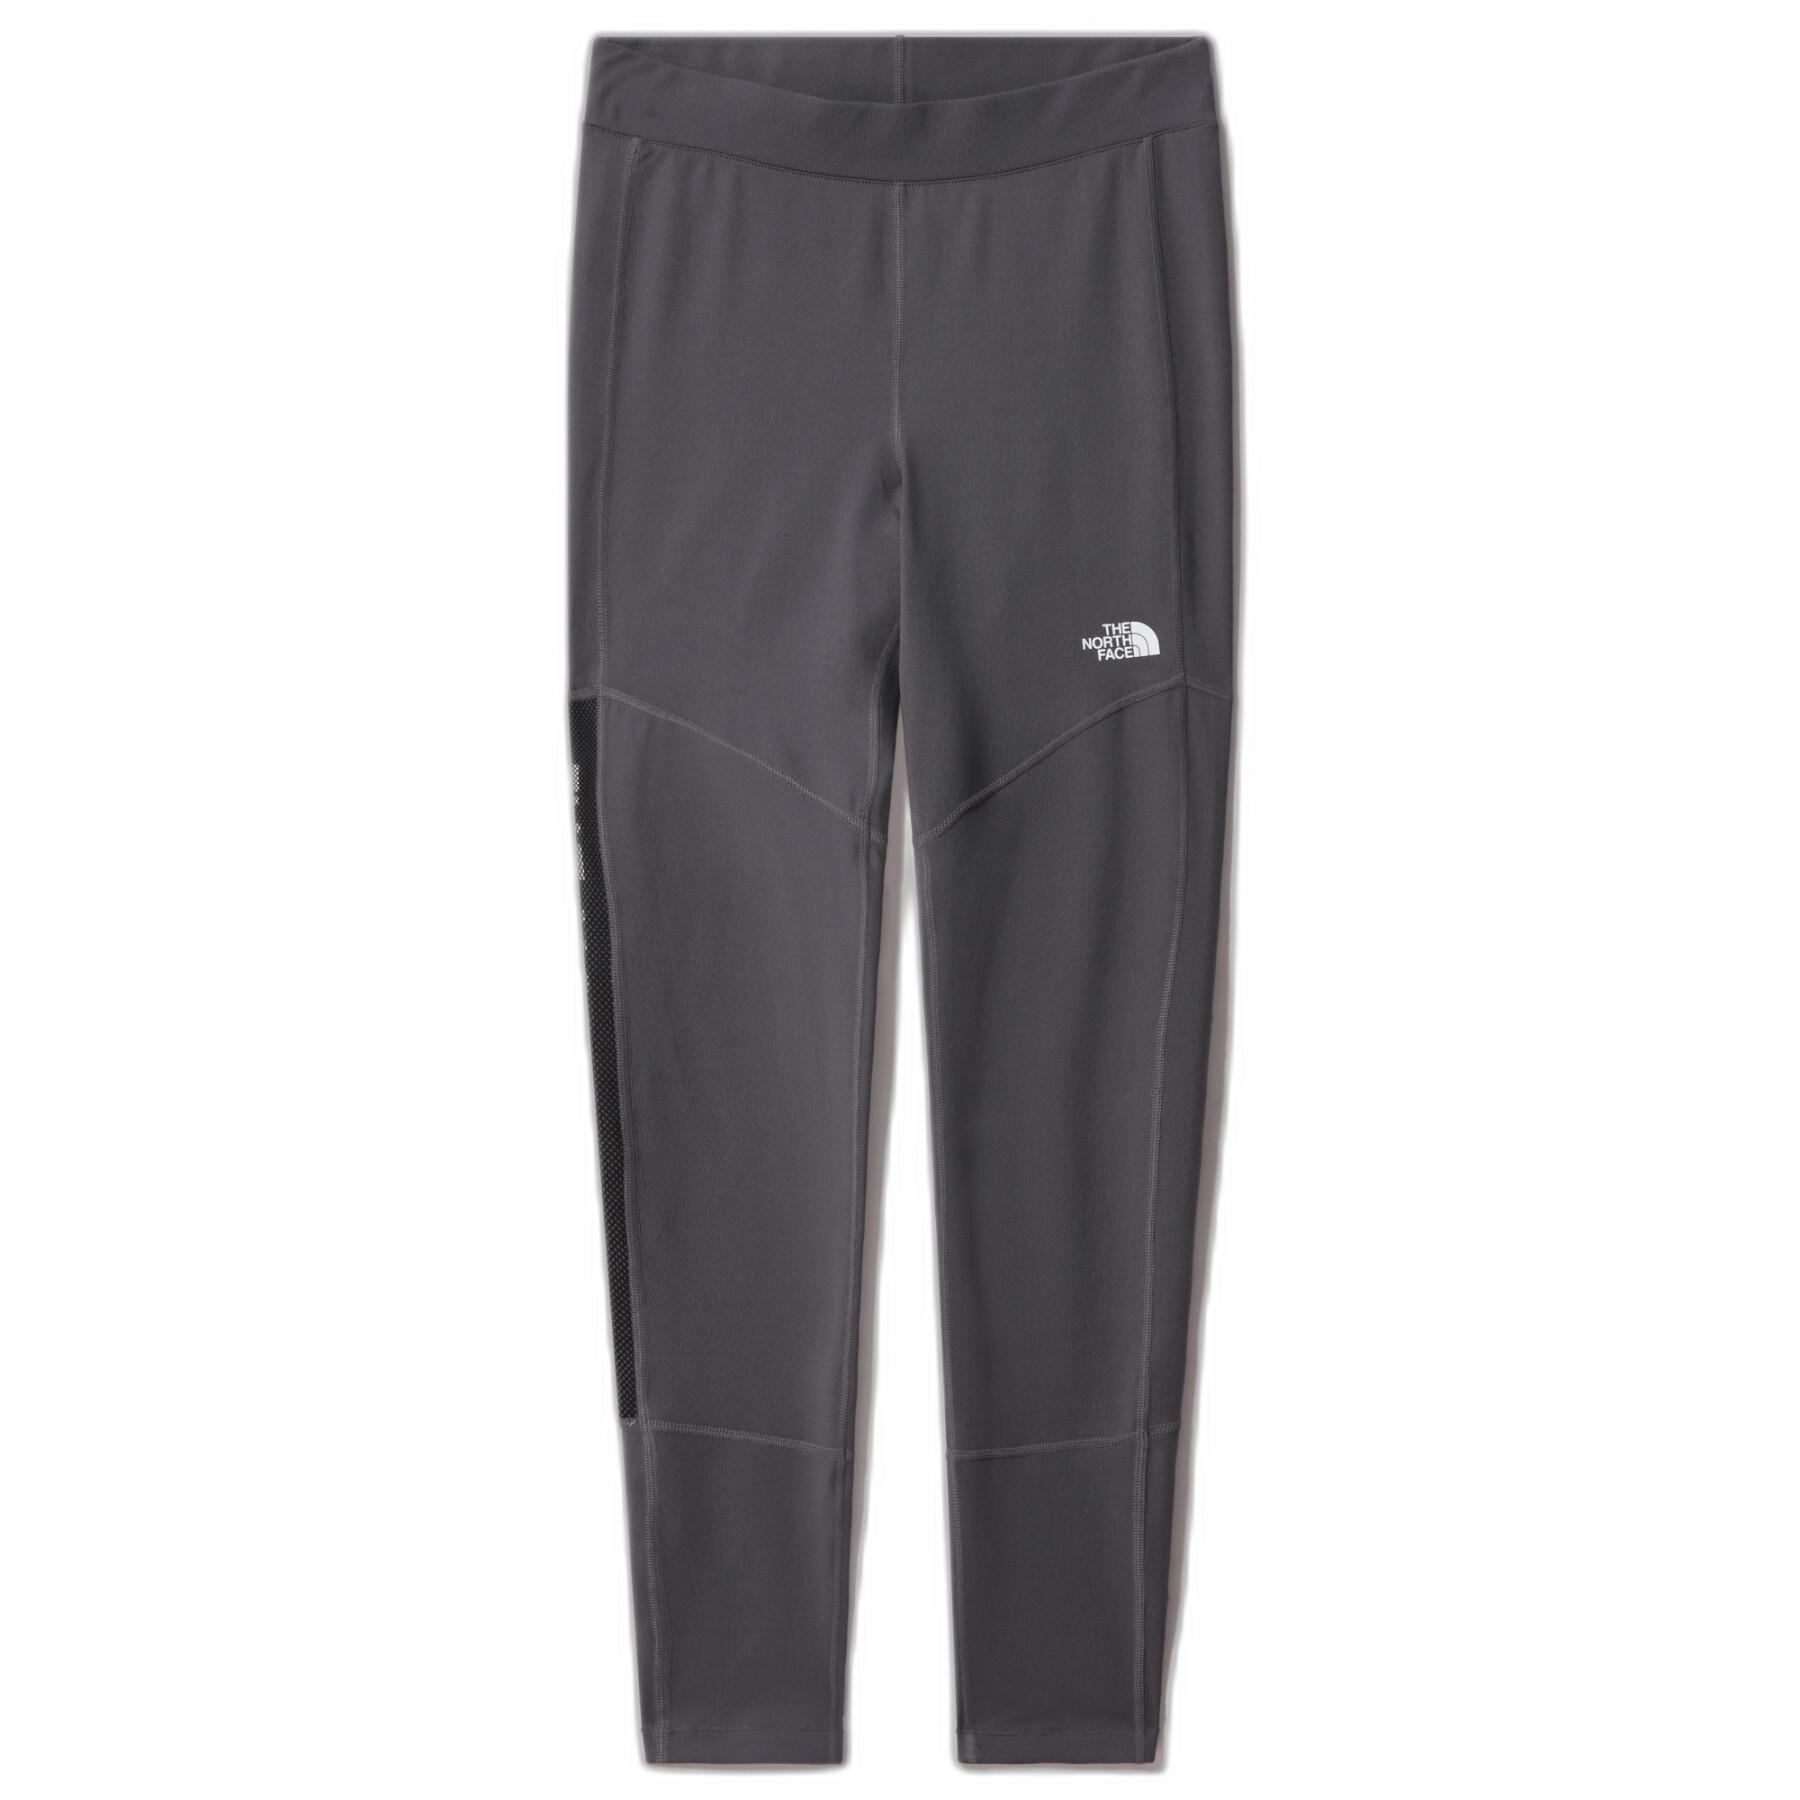 Collant The North Face femme Tight